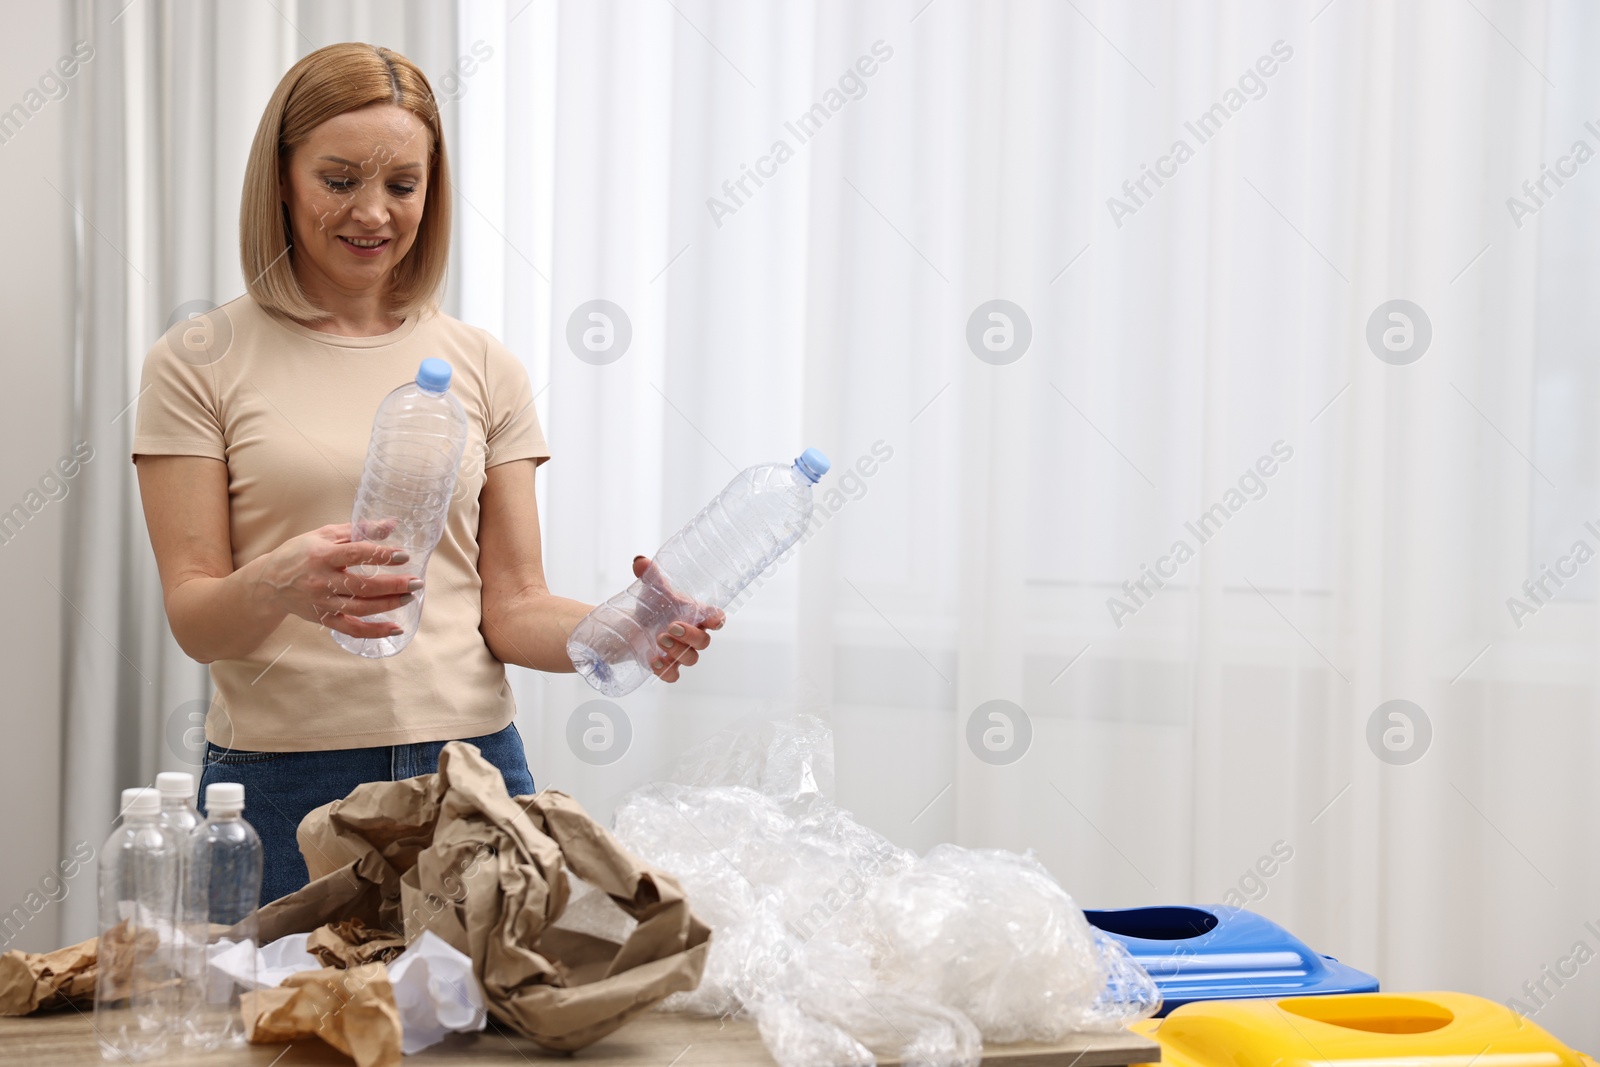 Photo of Smiling woman separating garbage in room. Space for text